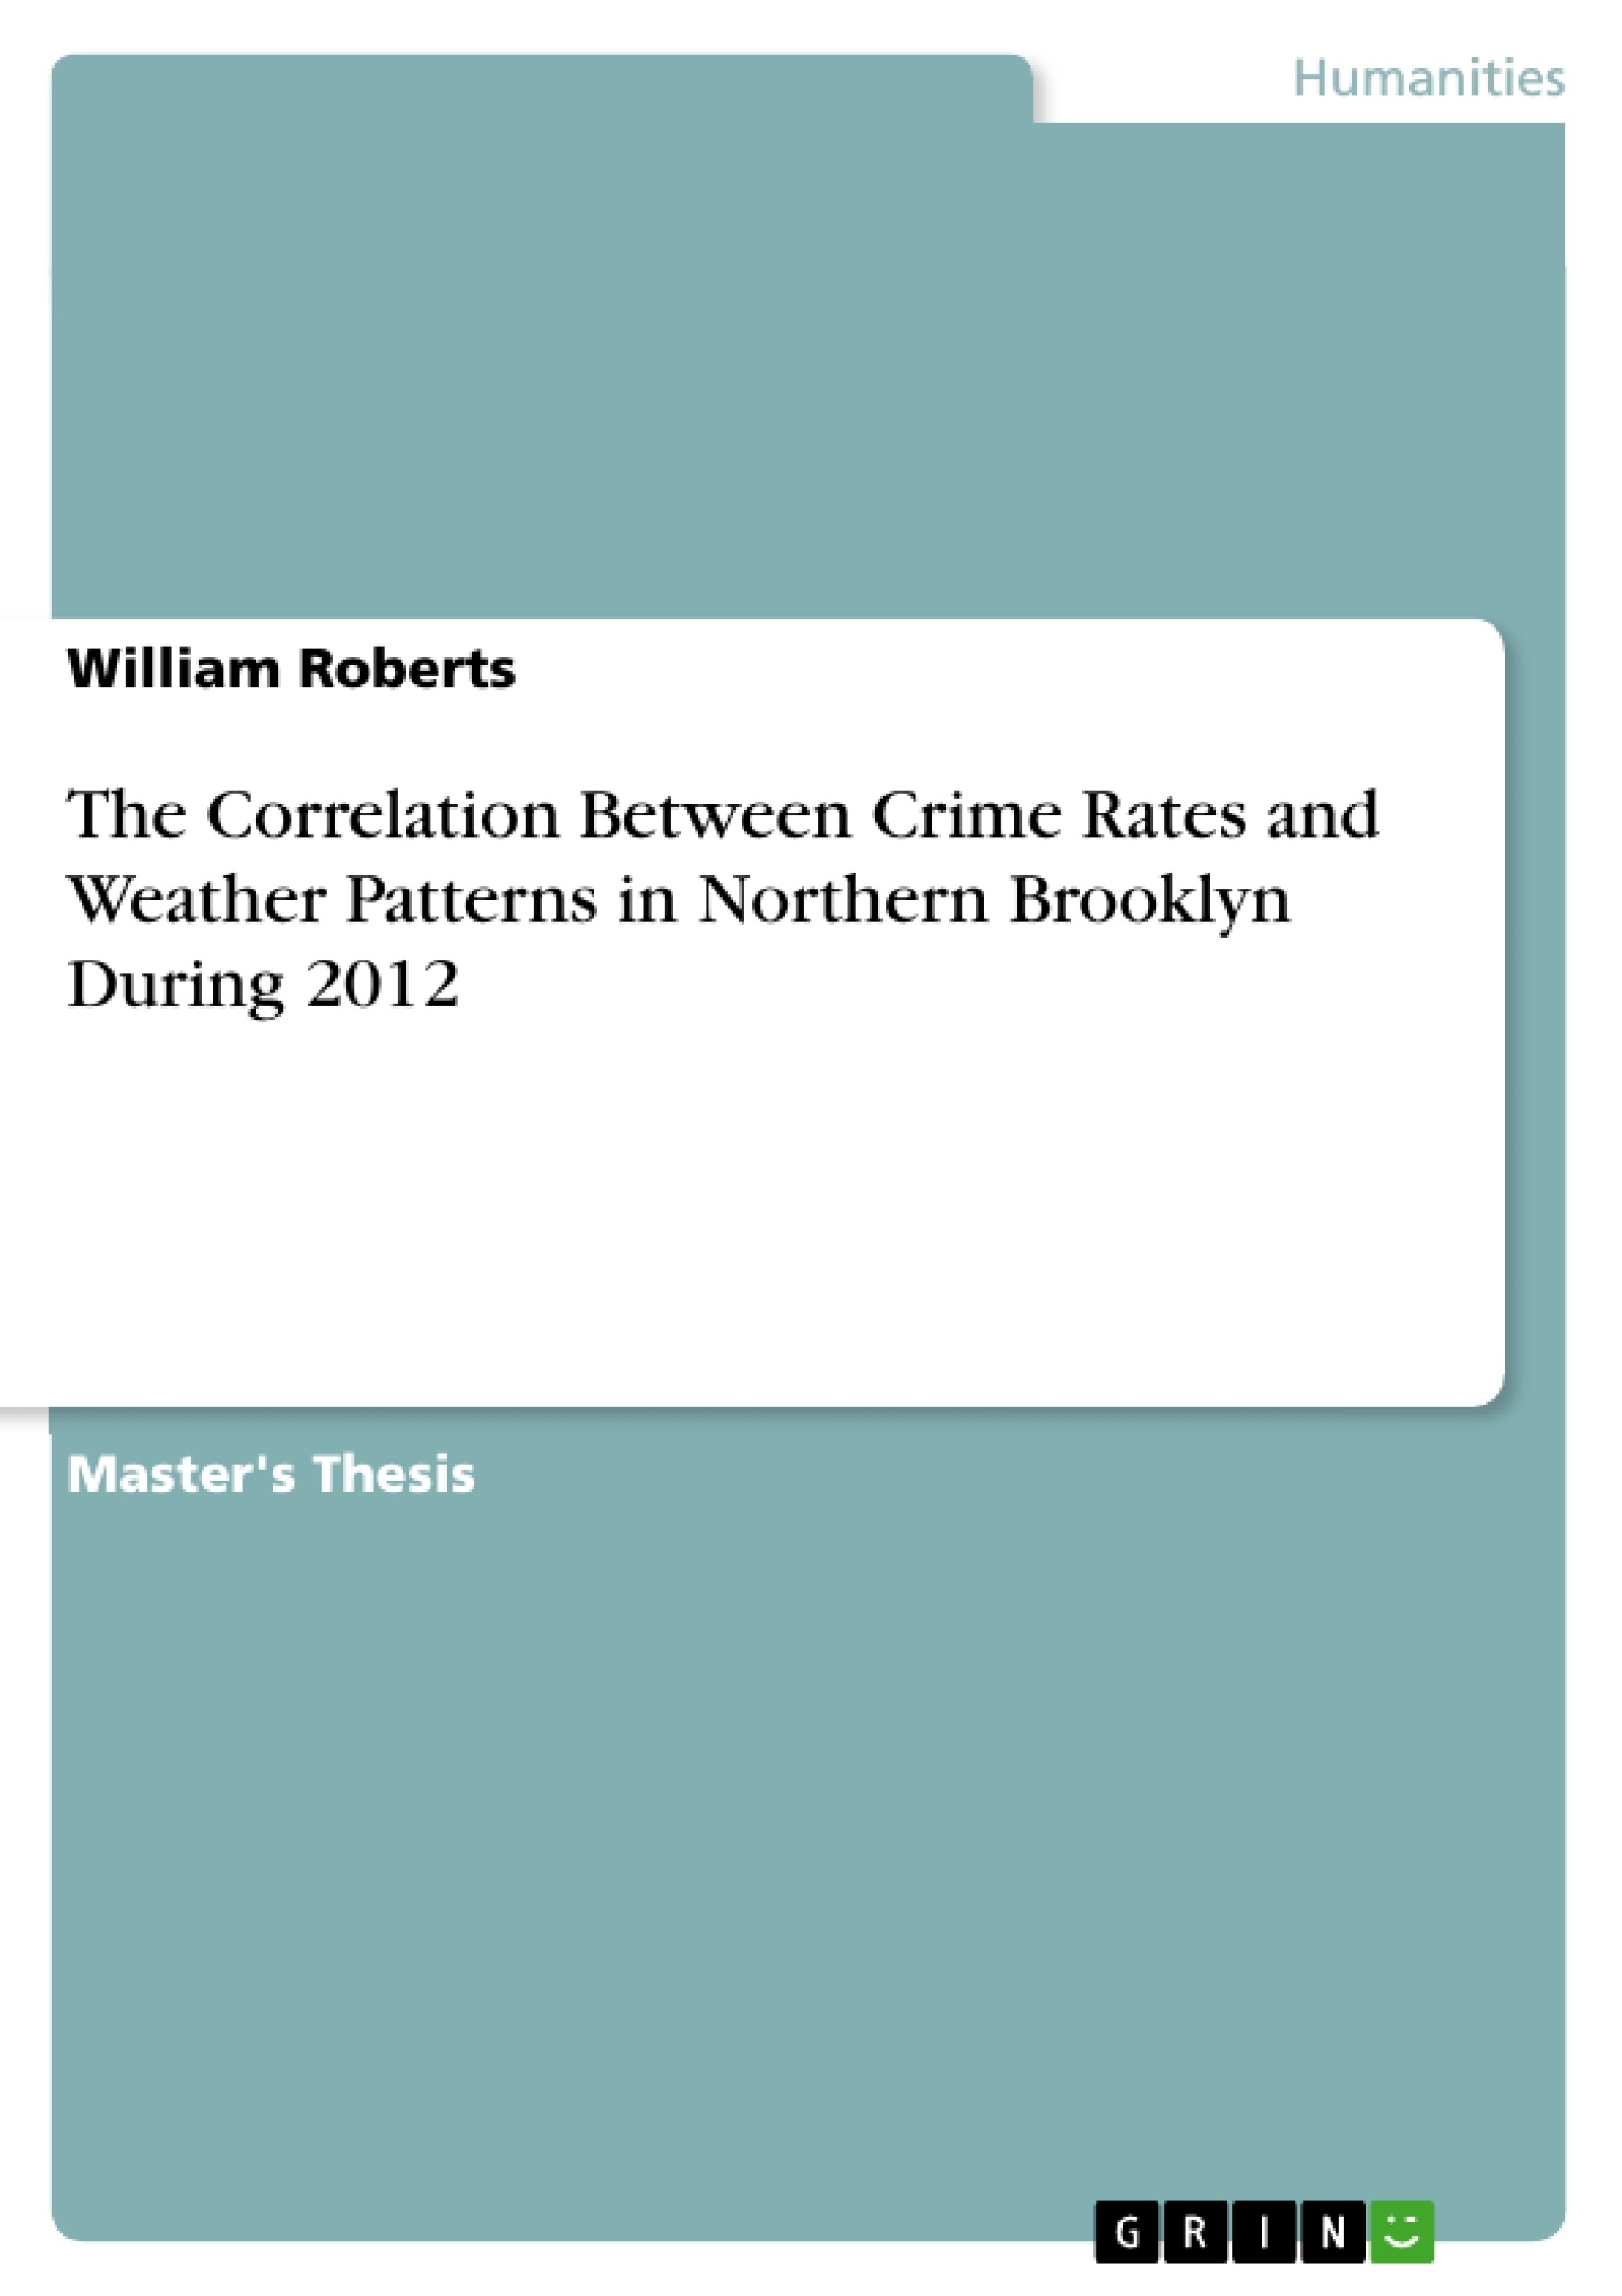 Title: The Correlation Between Crime Rates and Weather Patterns in Northern Brooklyn During 2012